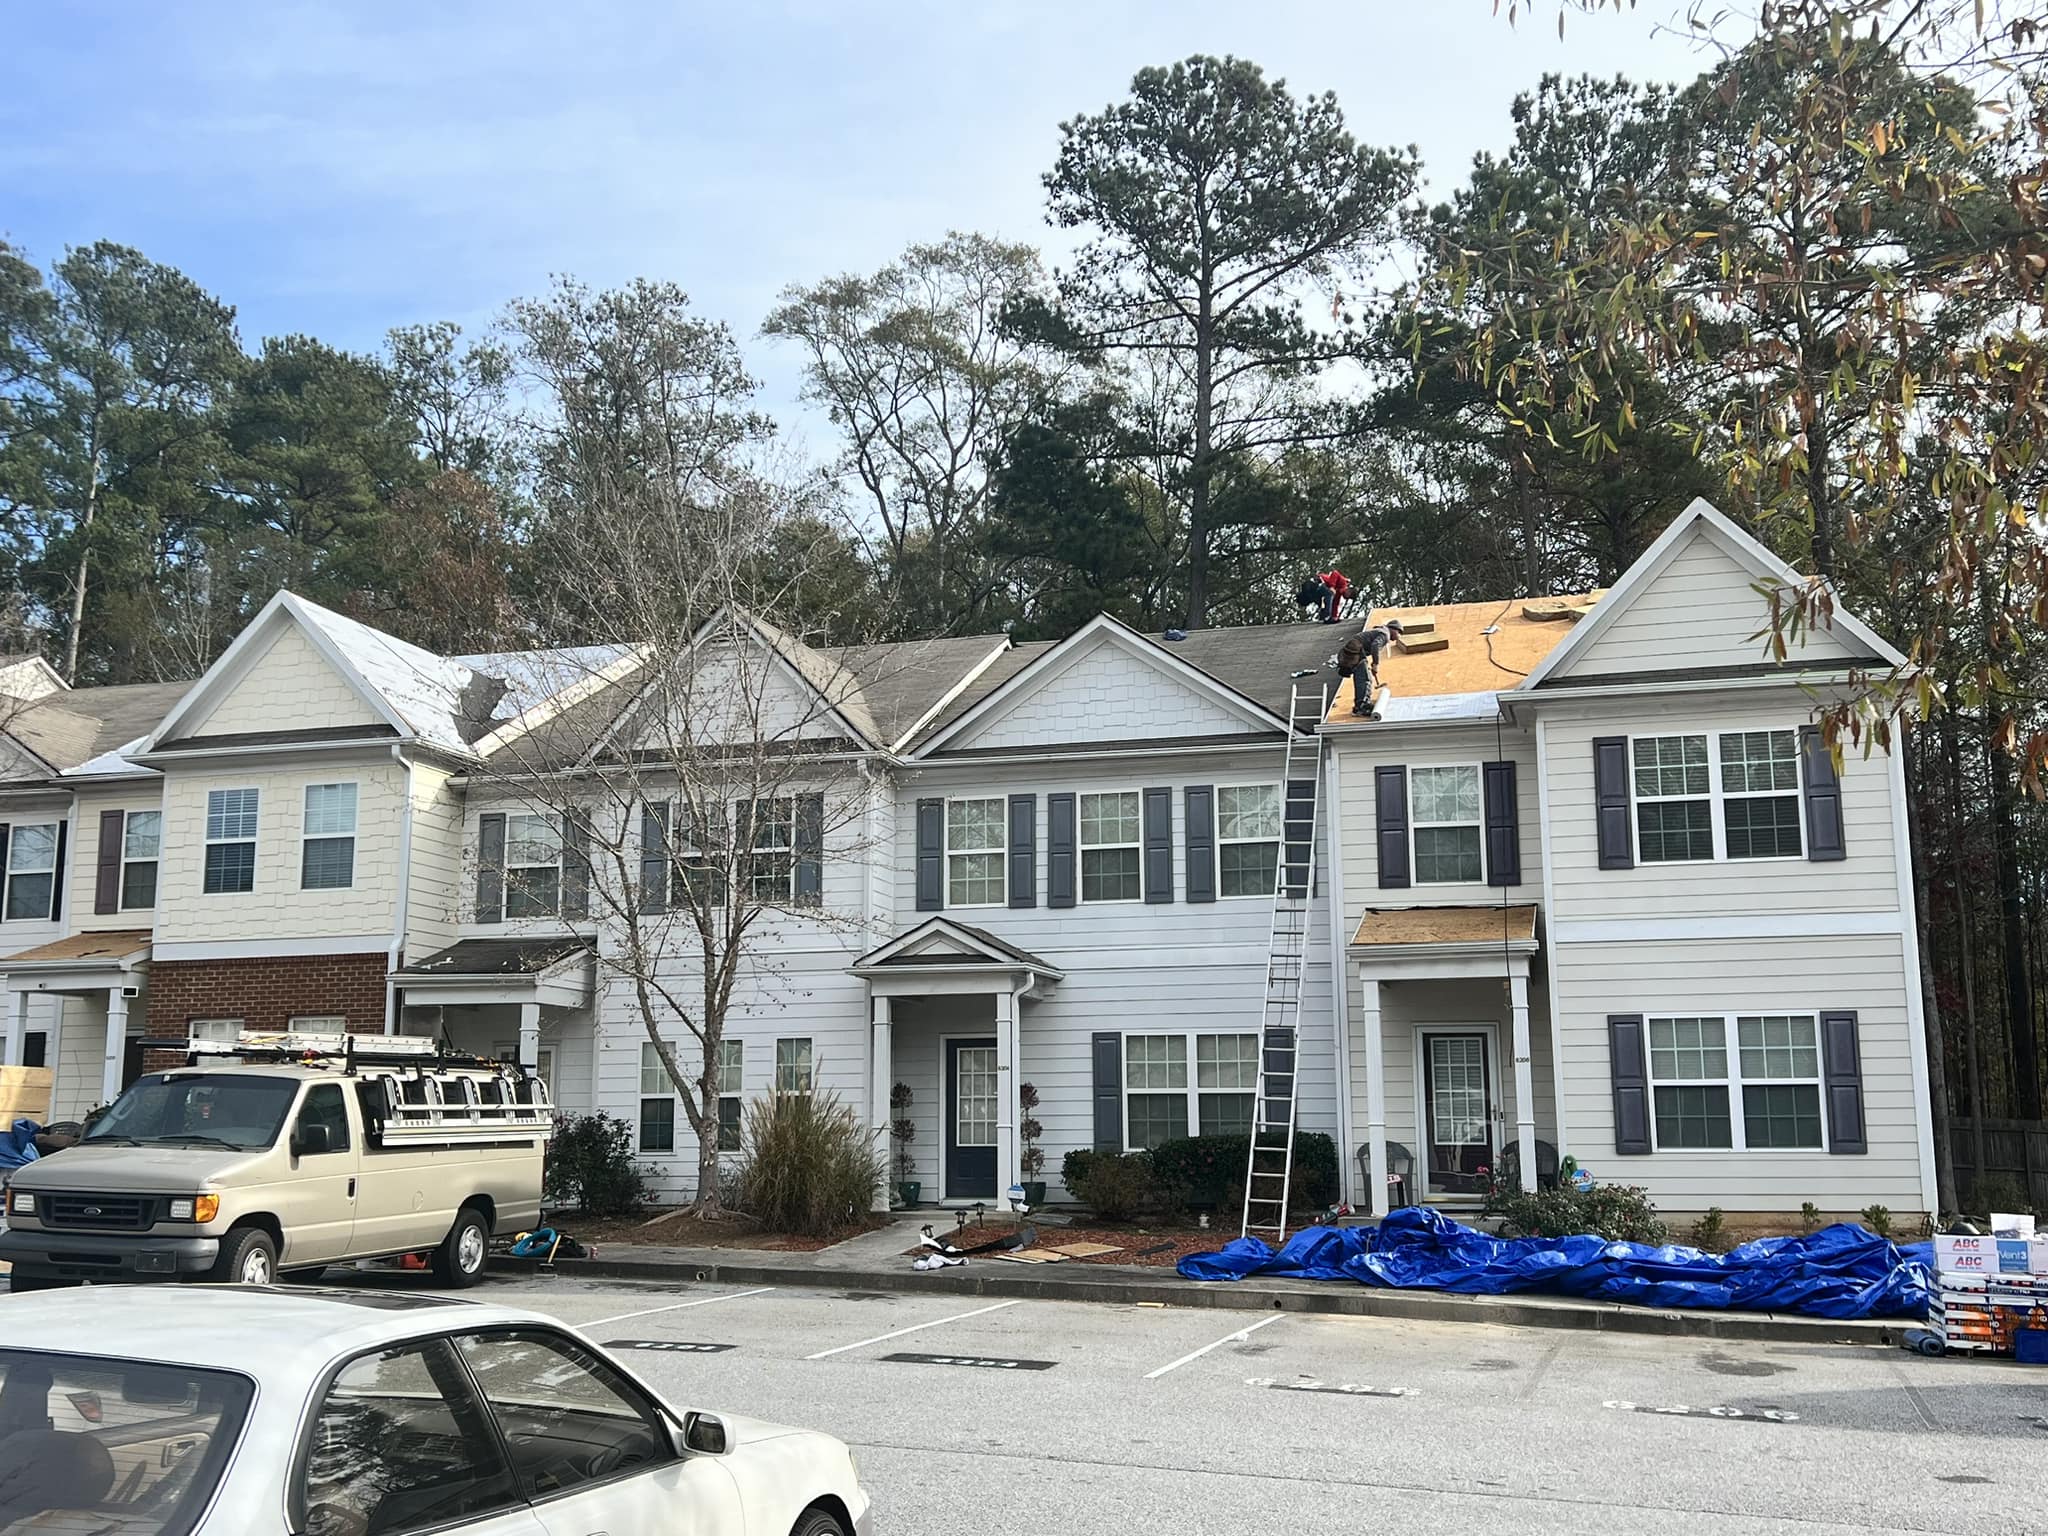 Supreme Roswell Roofing: Setting New Standards in Roofing Excellence